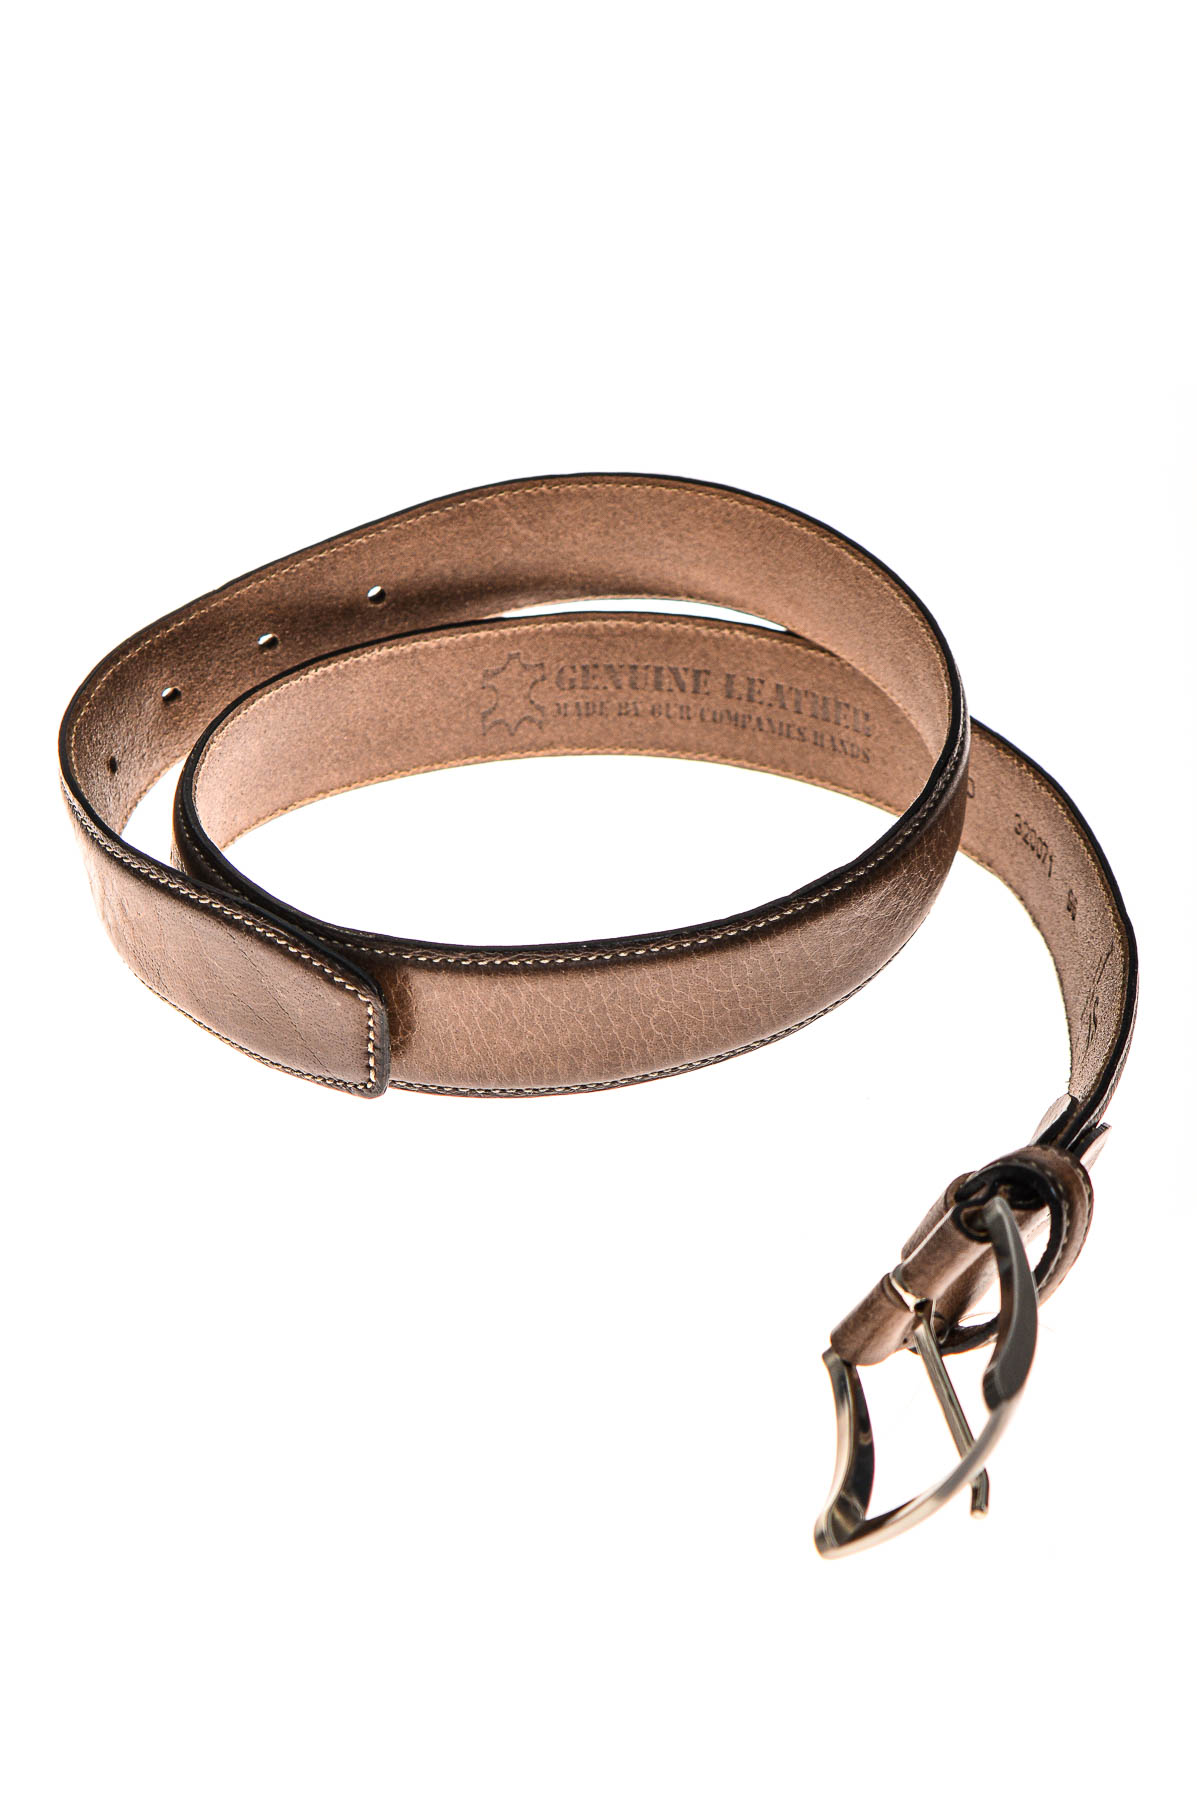 Men's belt - SF Passion for Leather - 1